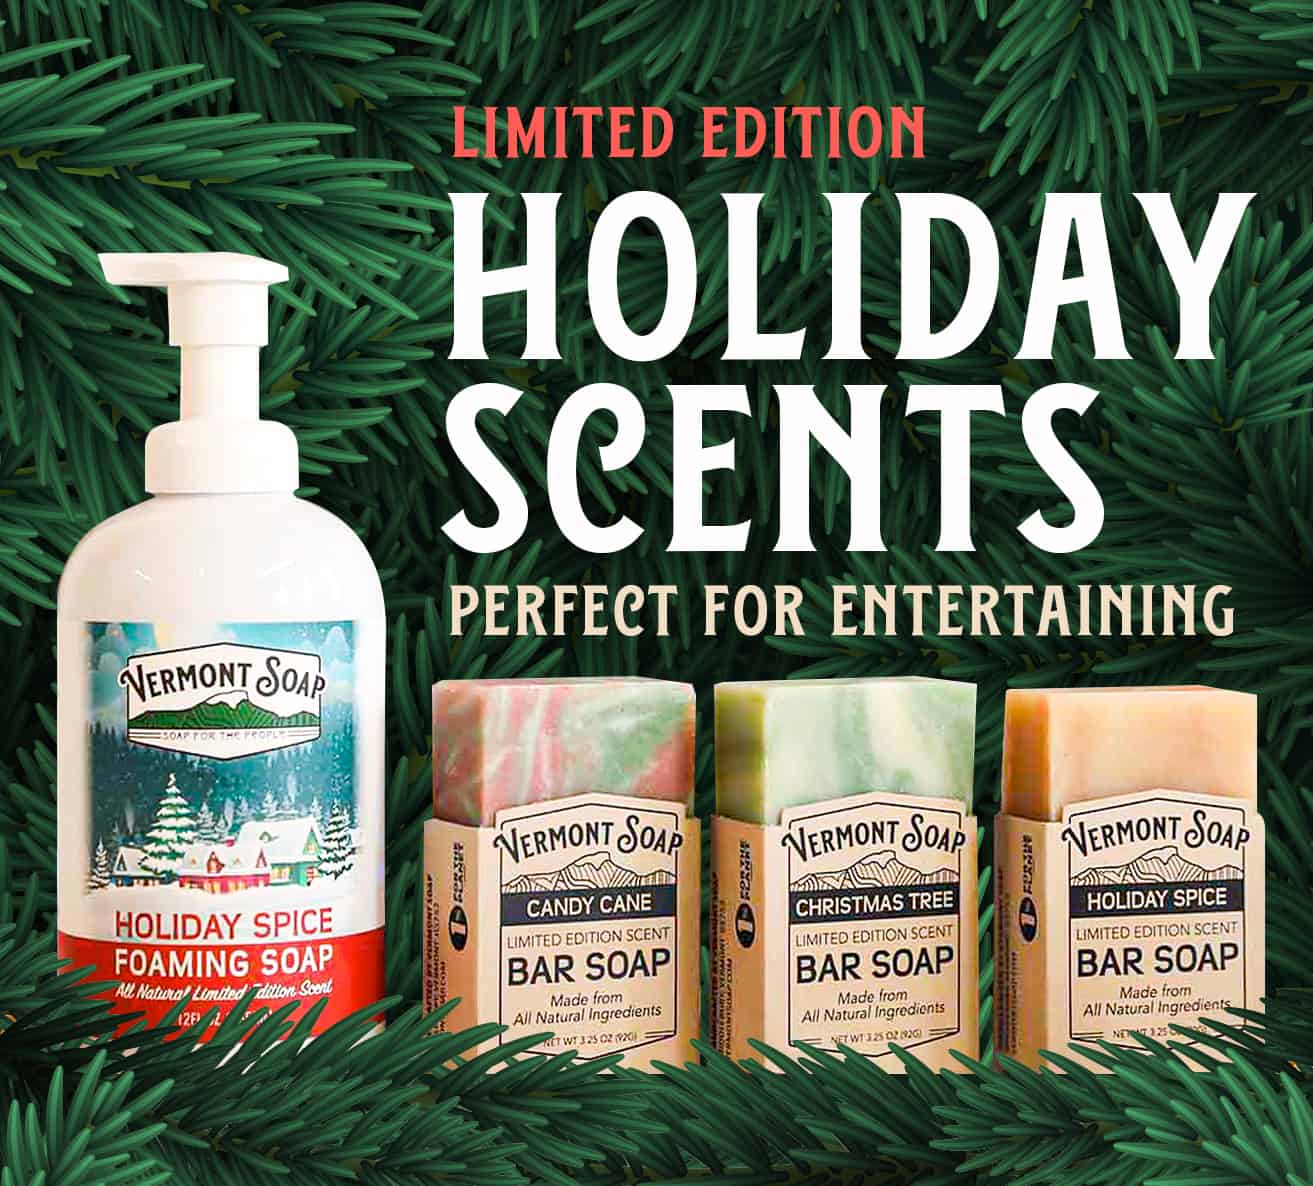 Vermont Soap Holiday Products